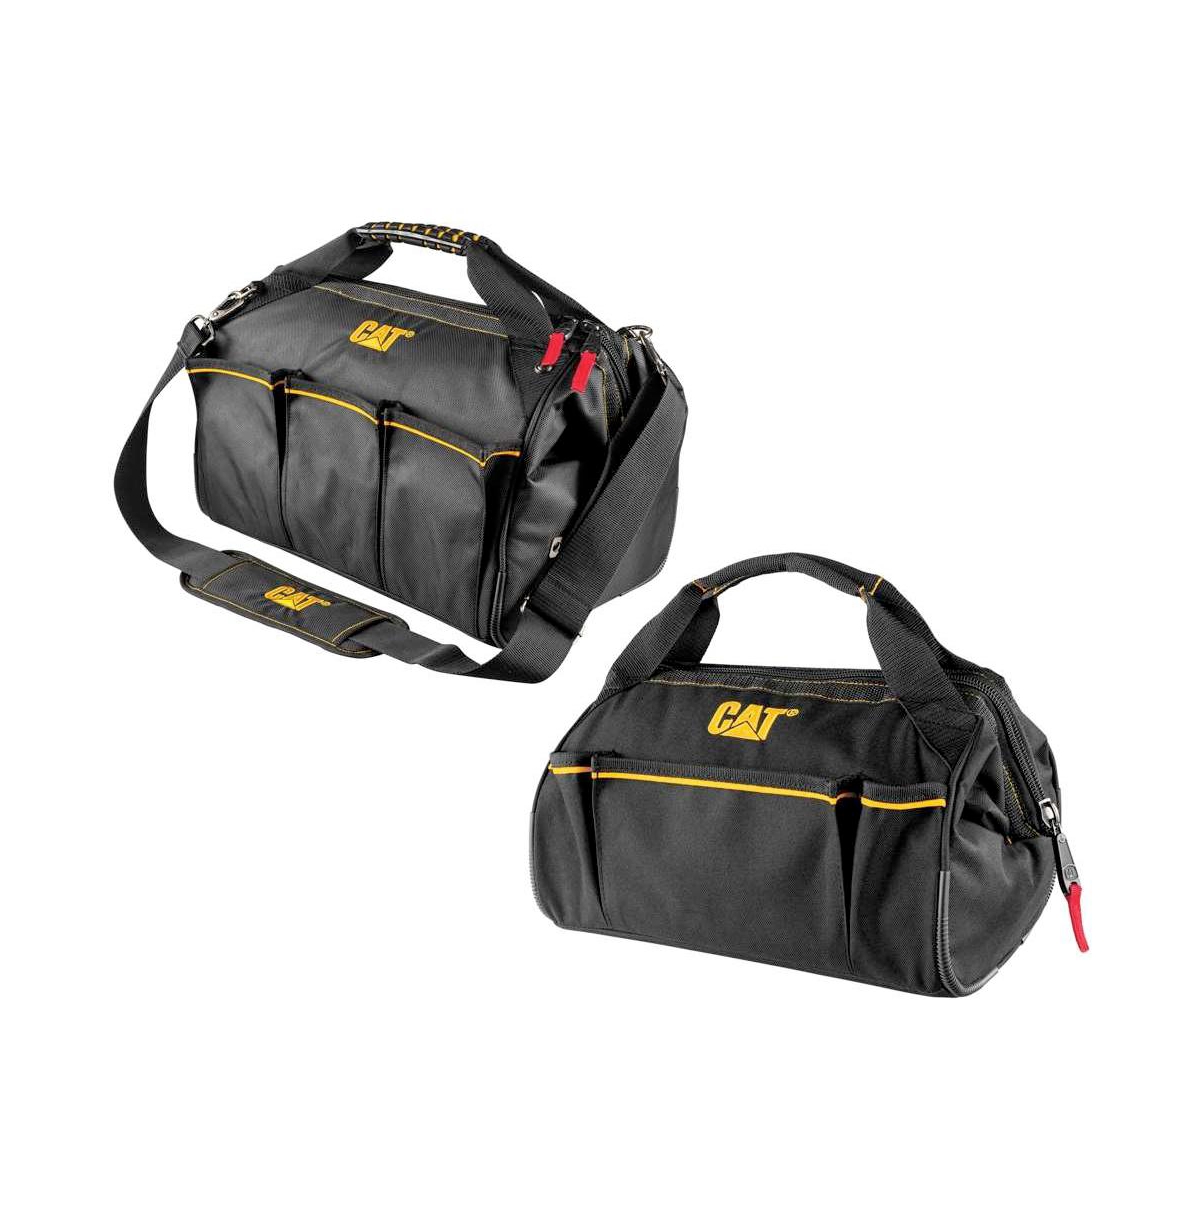 2 Piece Wide Mouth Tool Bag Set with 13-Inch and 16-Inch Bags